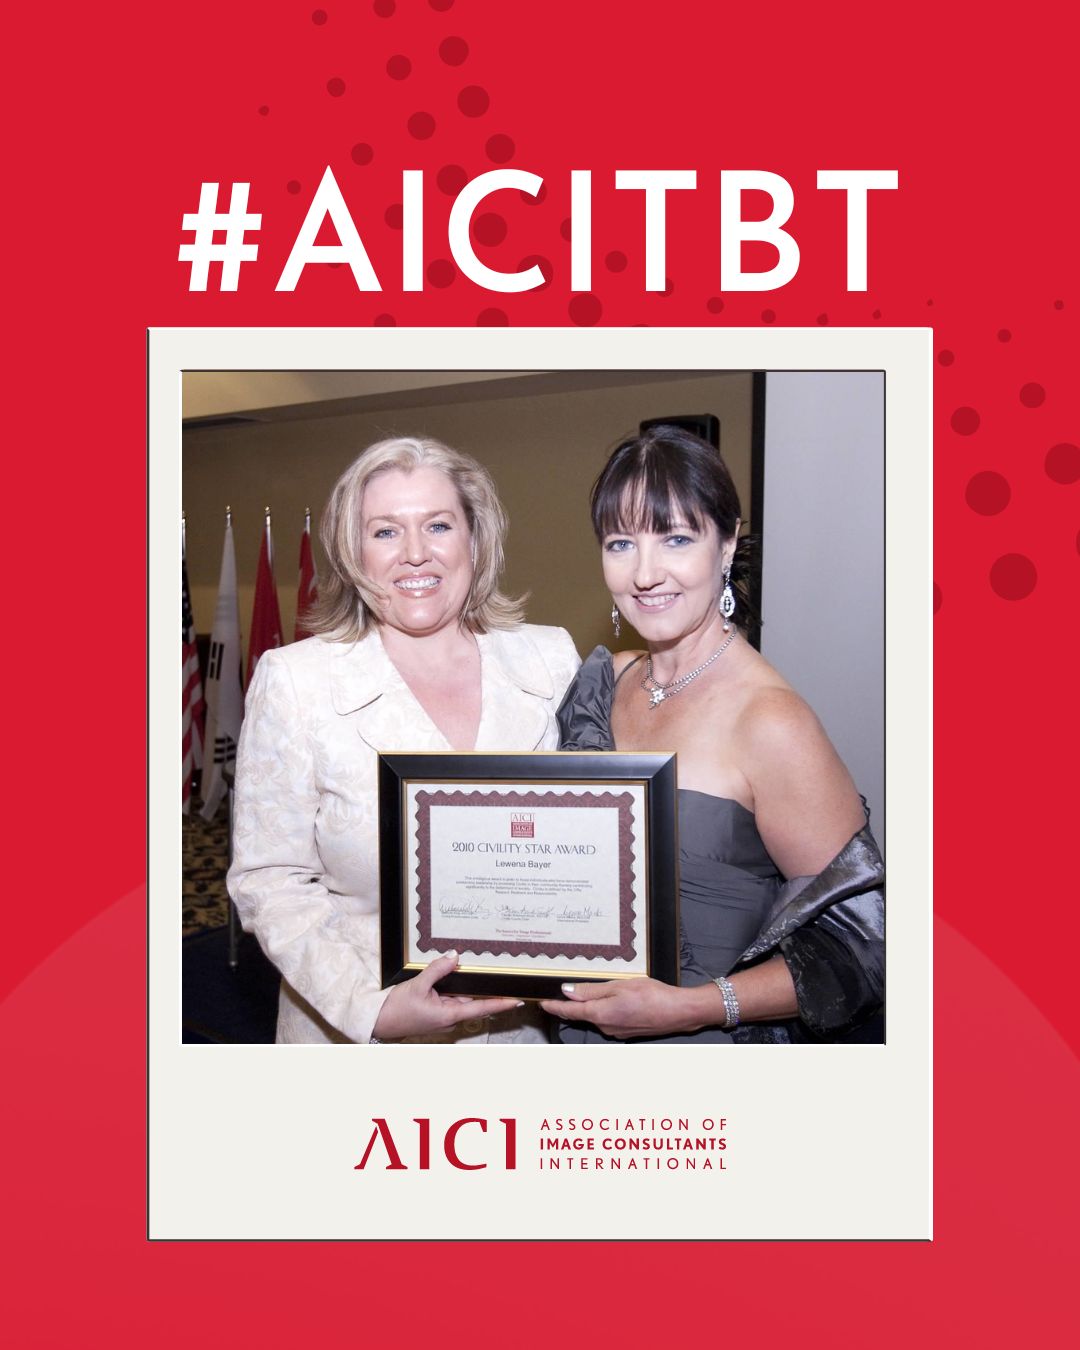  Image consultants , Image consulting, AICI Global